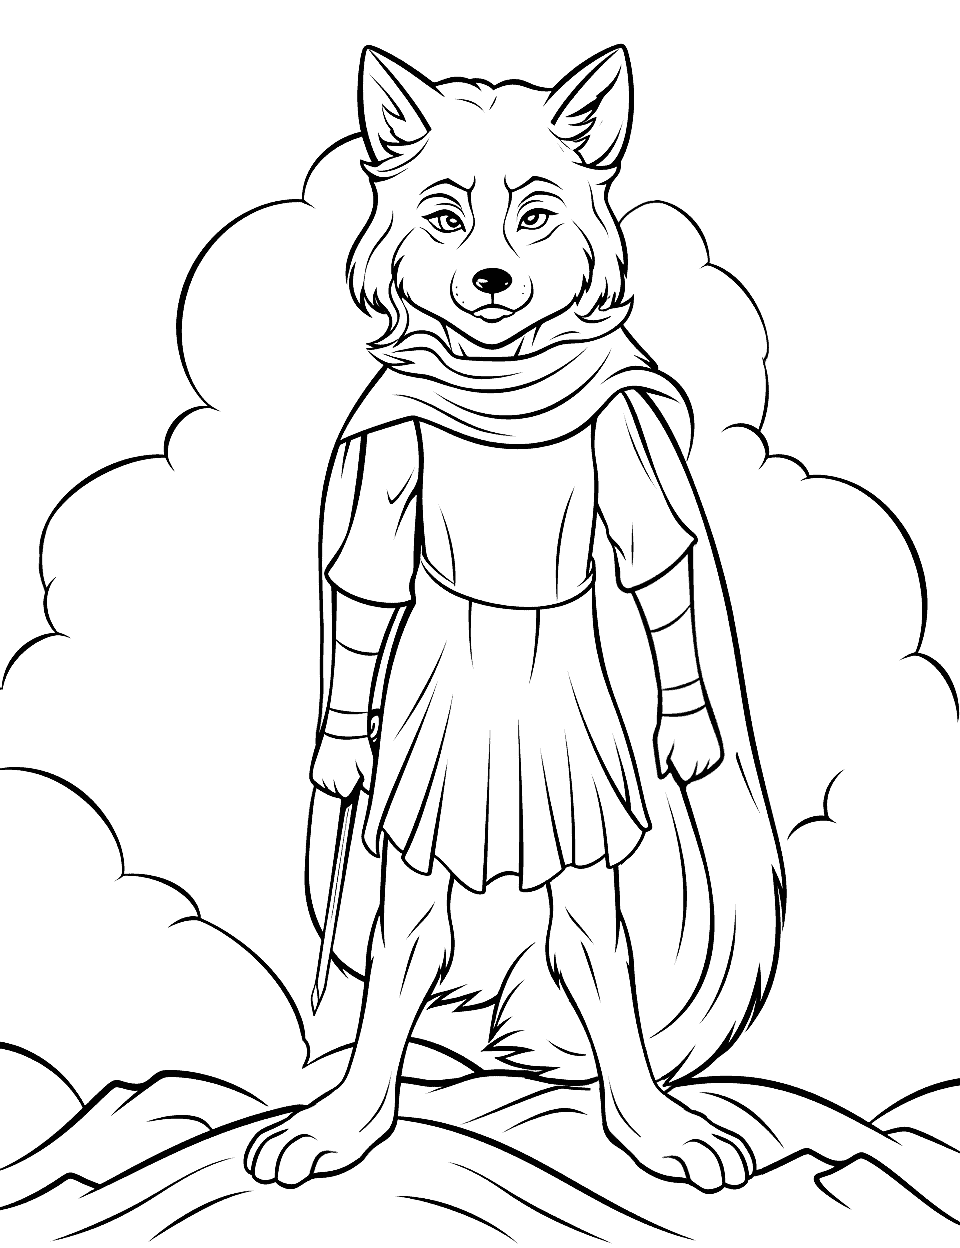 Wolf Girl Warrior Coloring Page - A girl with wolf ears and a tail standing atop a hill.